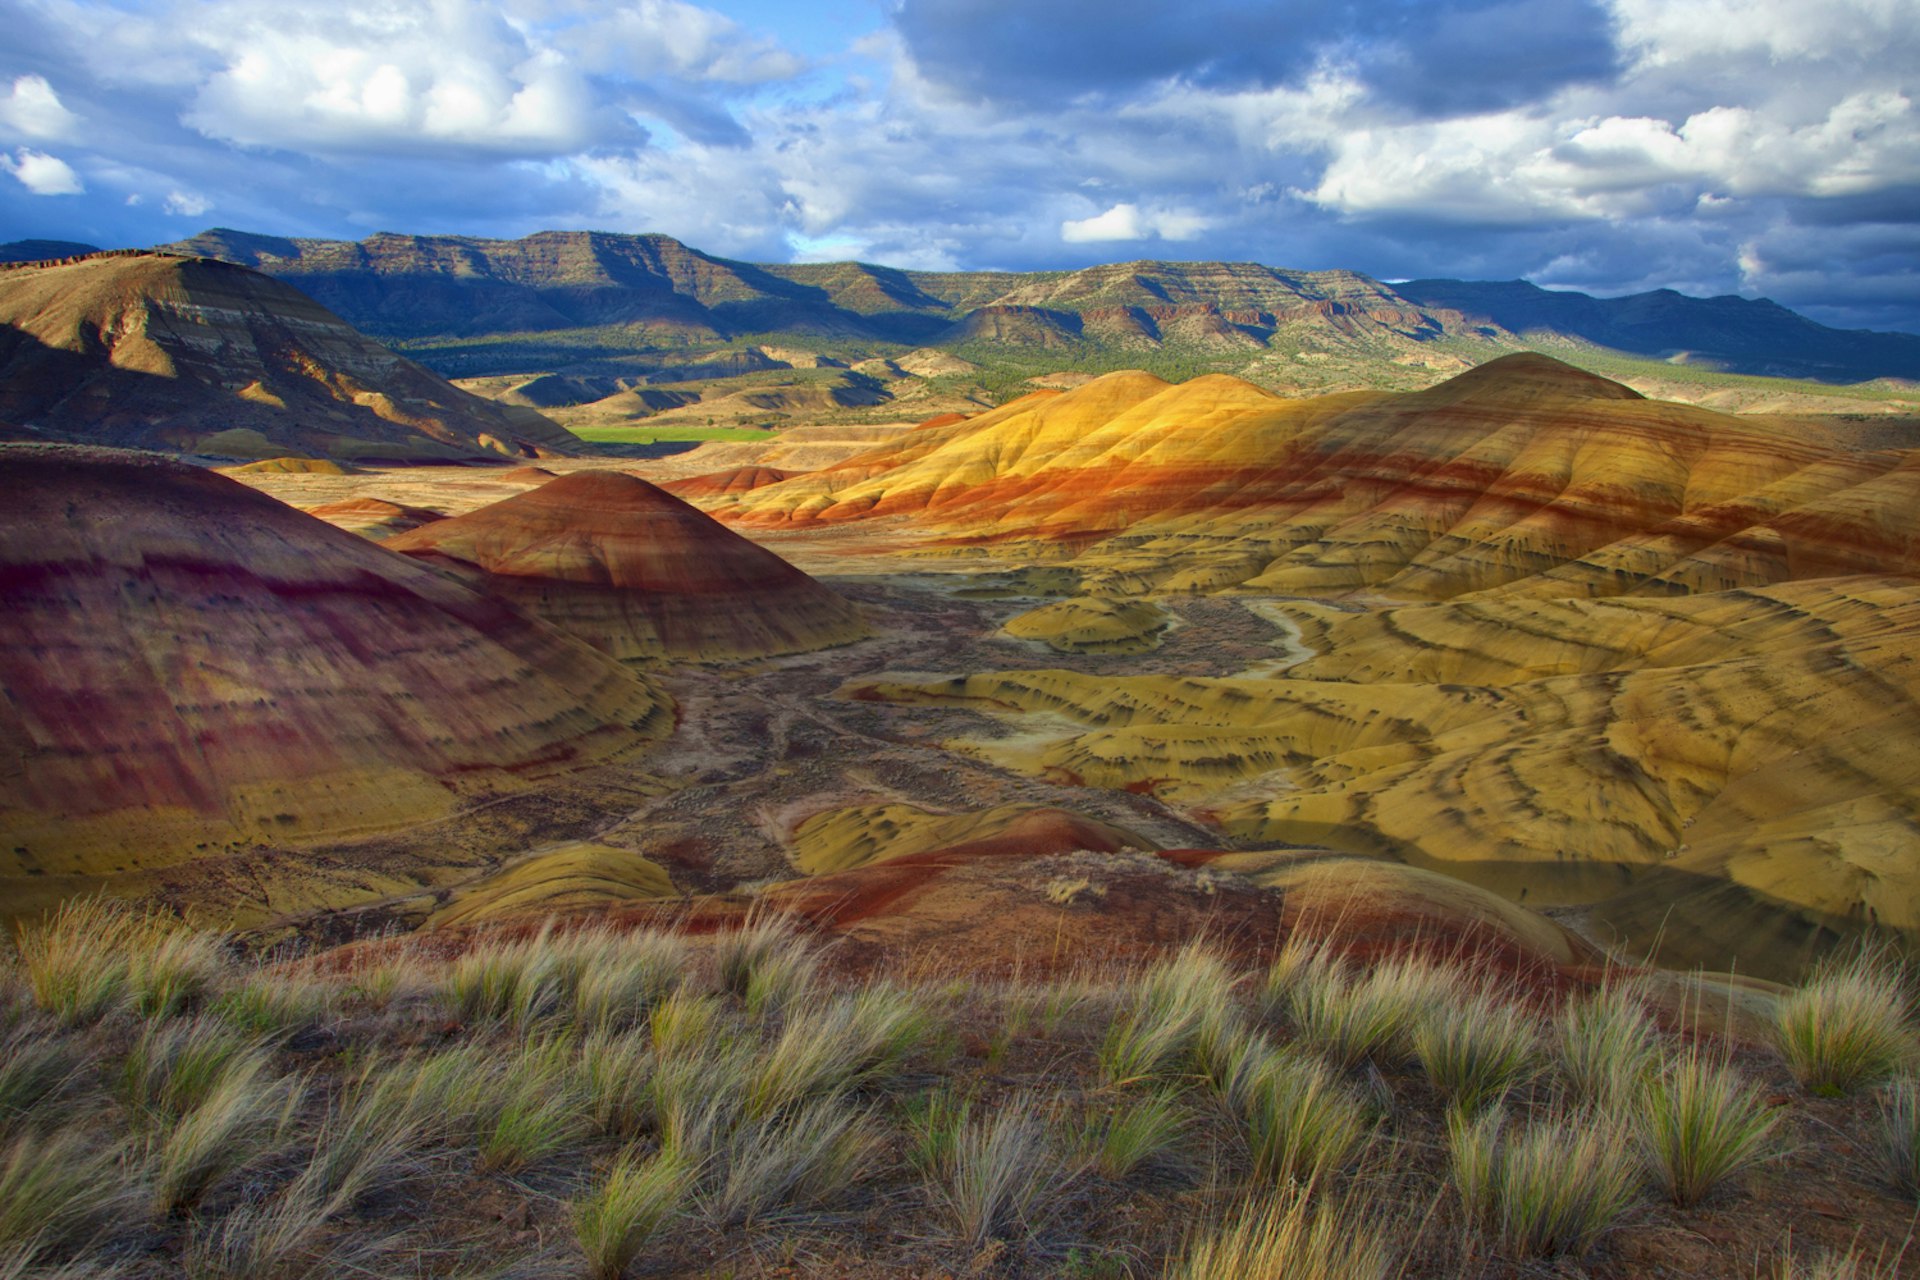 Formed by layers of volcanic ash and other deposits, the Painted Hills are a bewitching Oregon sight © Danita Delimont / Gallo Images / Getty